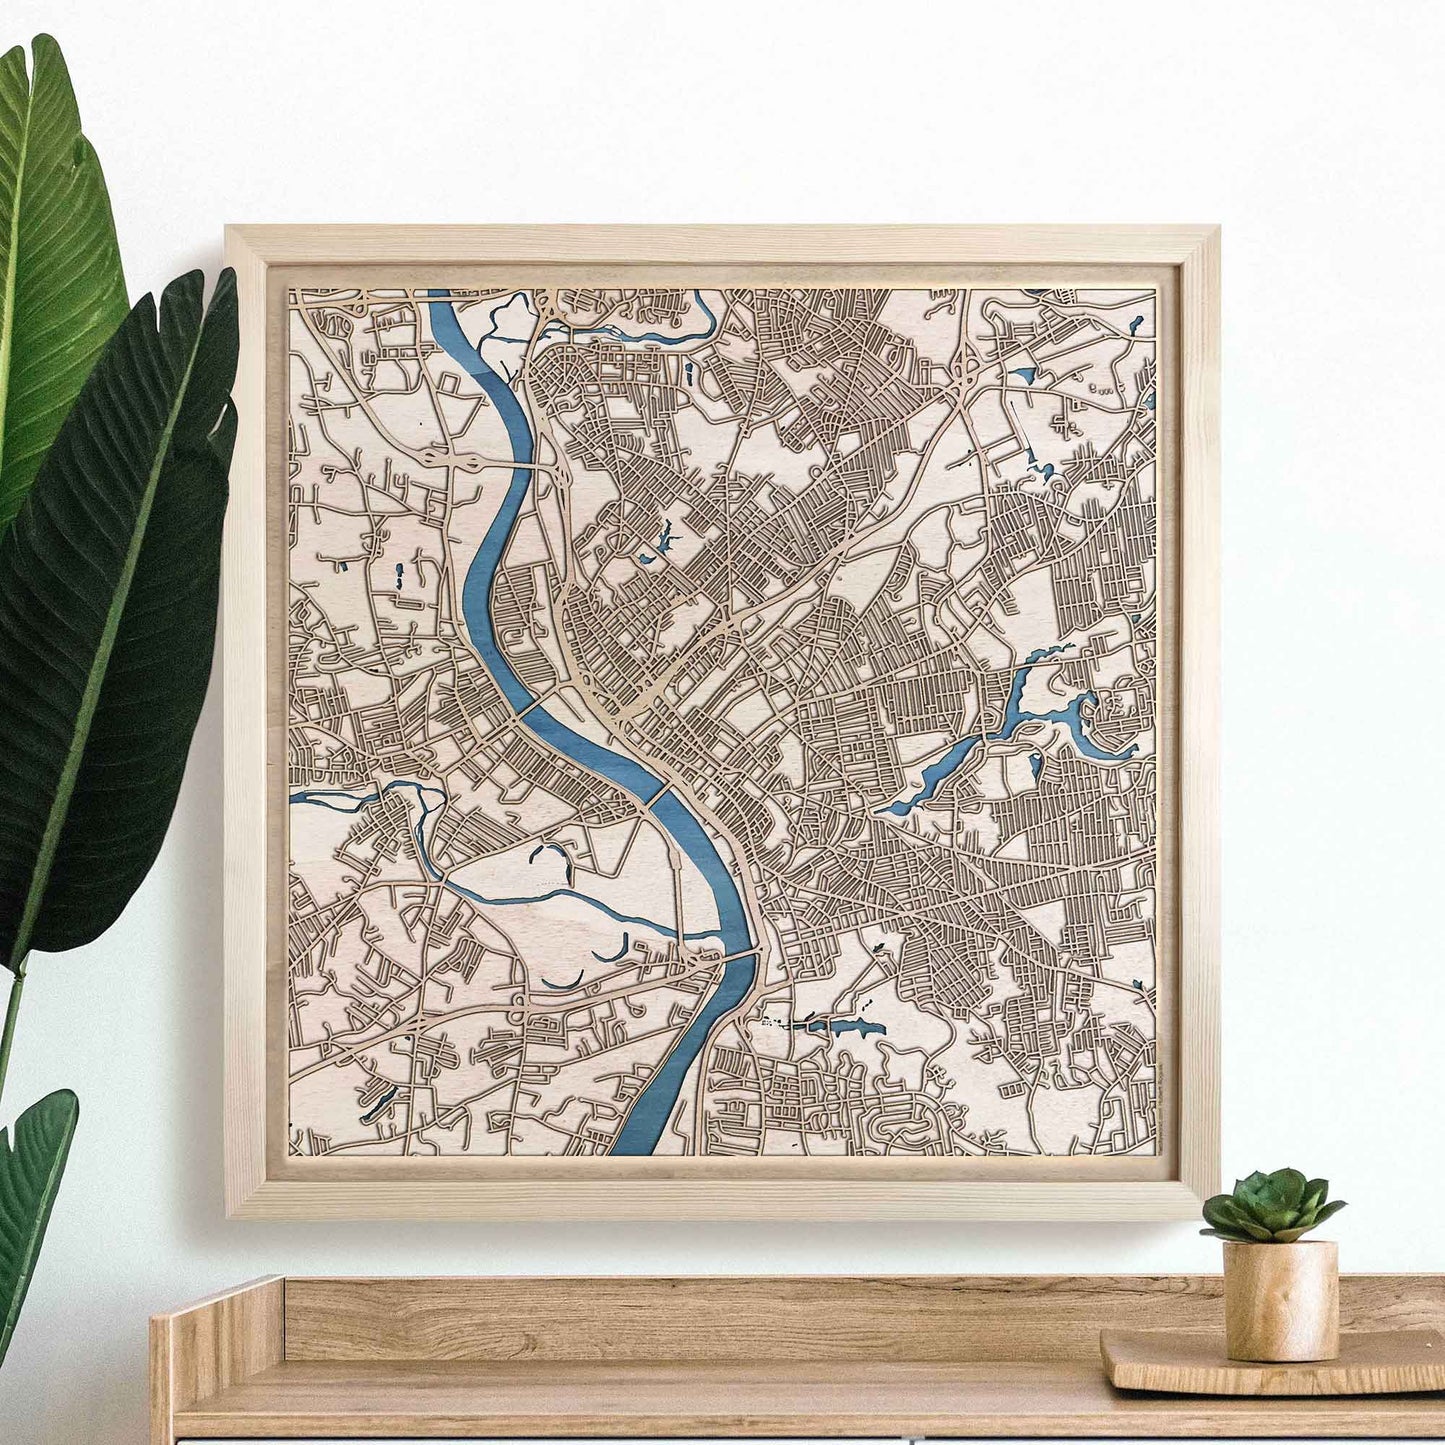 Springfield Wooden Map by CityWood - Custom Wood Map Art - Unique Laser Cut Engraved - Anniversary Gift